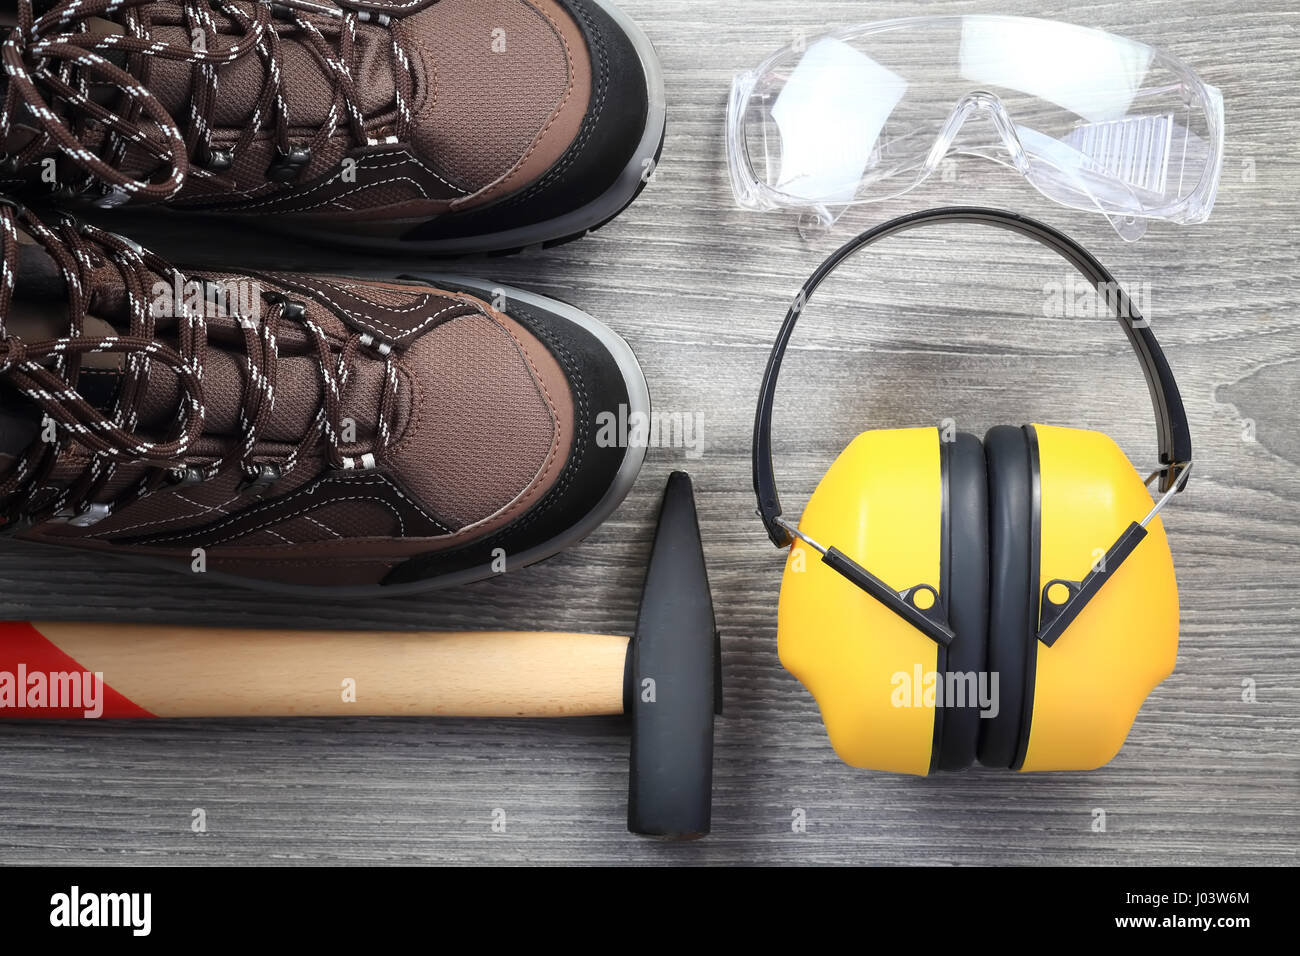 Working tools and clothes on wooden background. Close-up of protective glasses and headphone from above. Hammer with wood handle. New working shoes cl Stock Photo